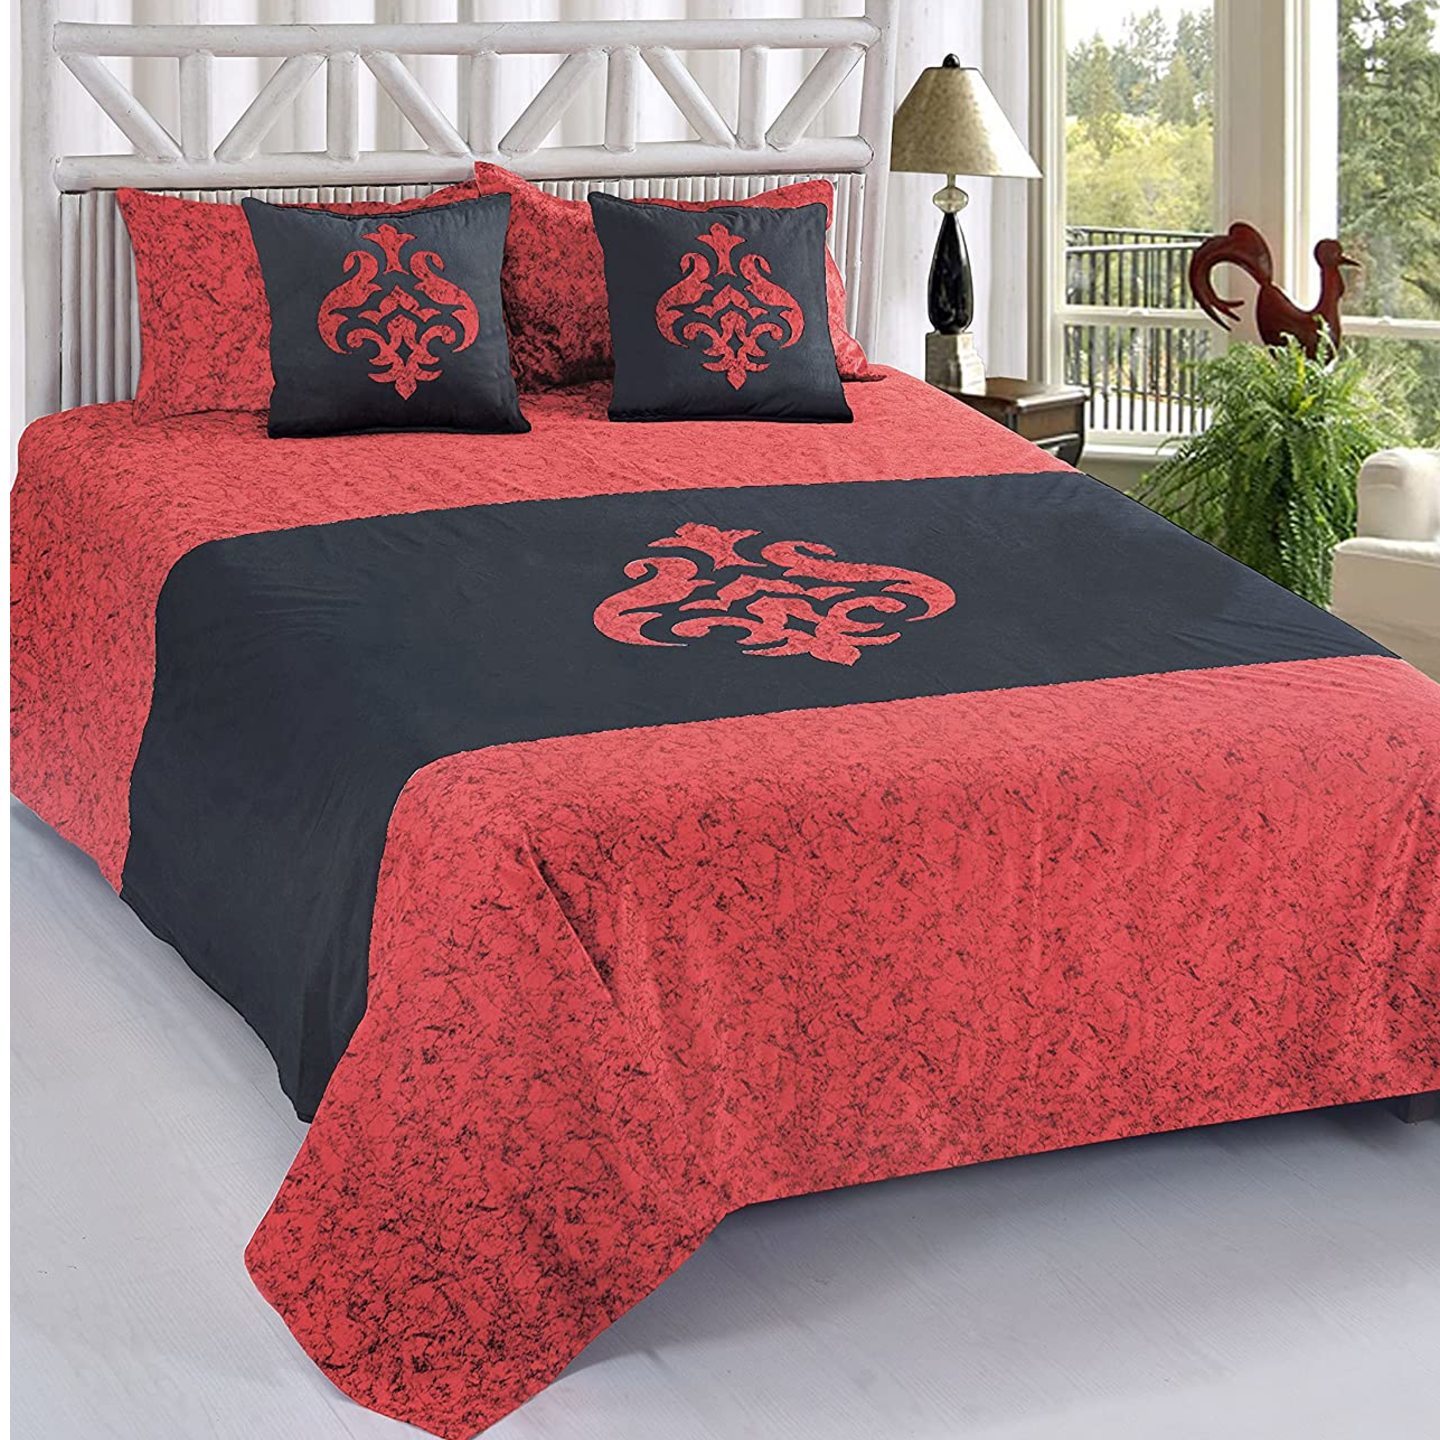 Hantex Home Double Bed Sheet with 2 Pillow Covers and 2 Cushions Covers , king Size - 90 x 100 Damask design